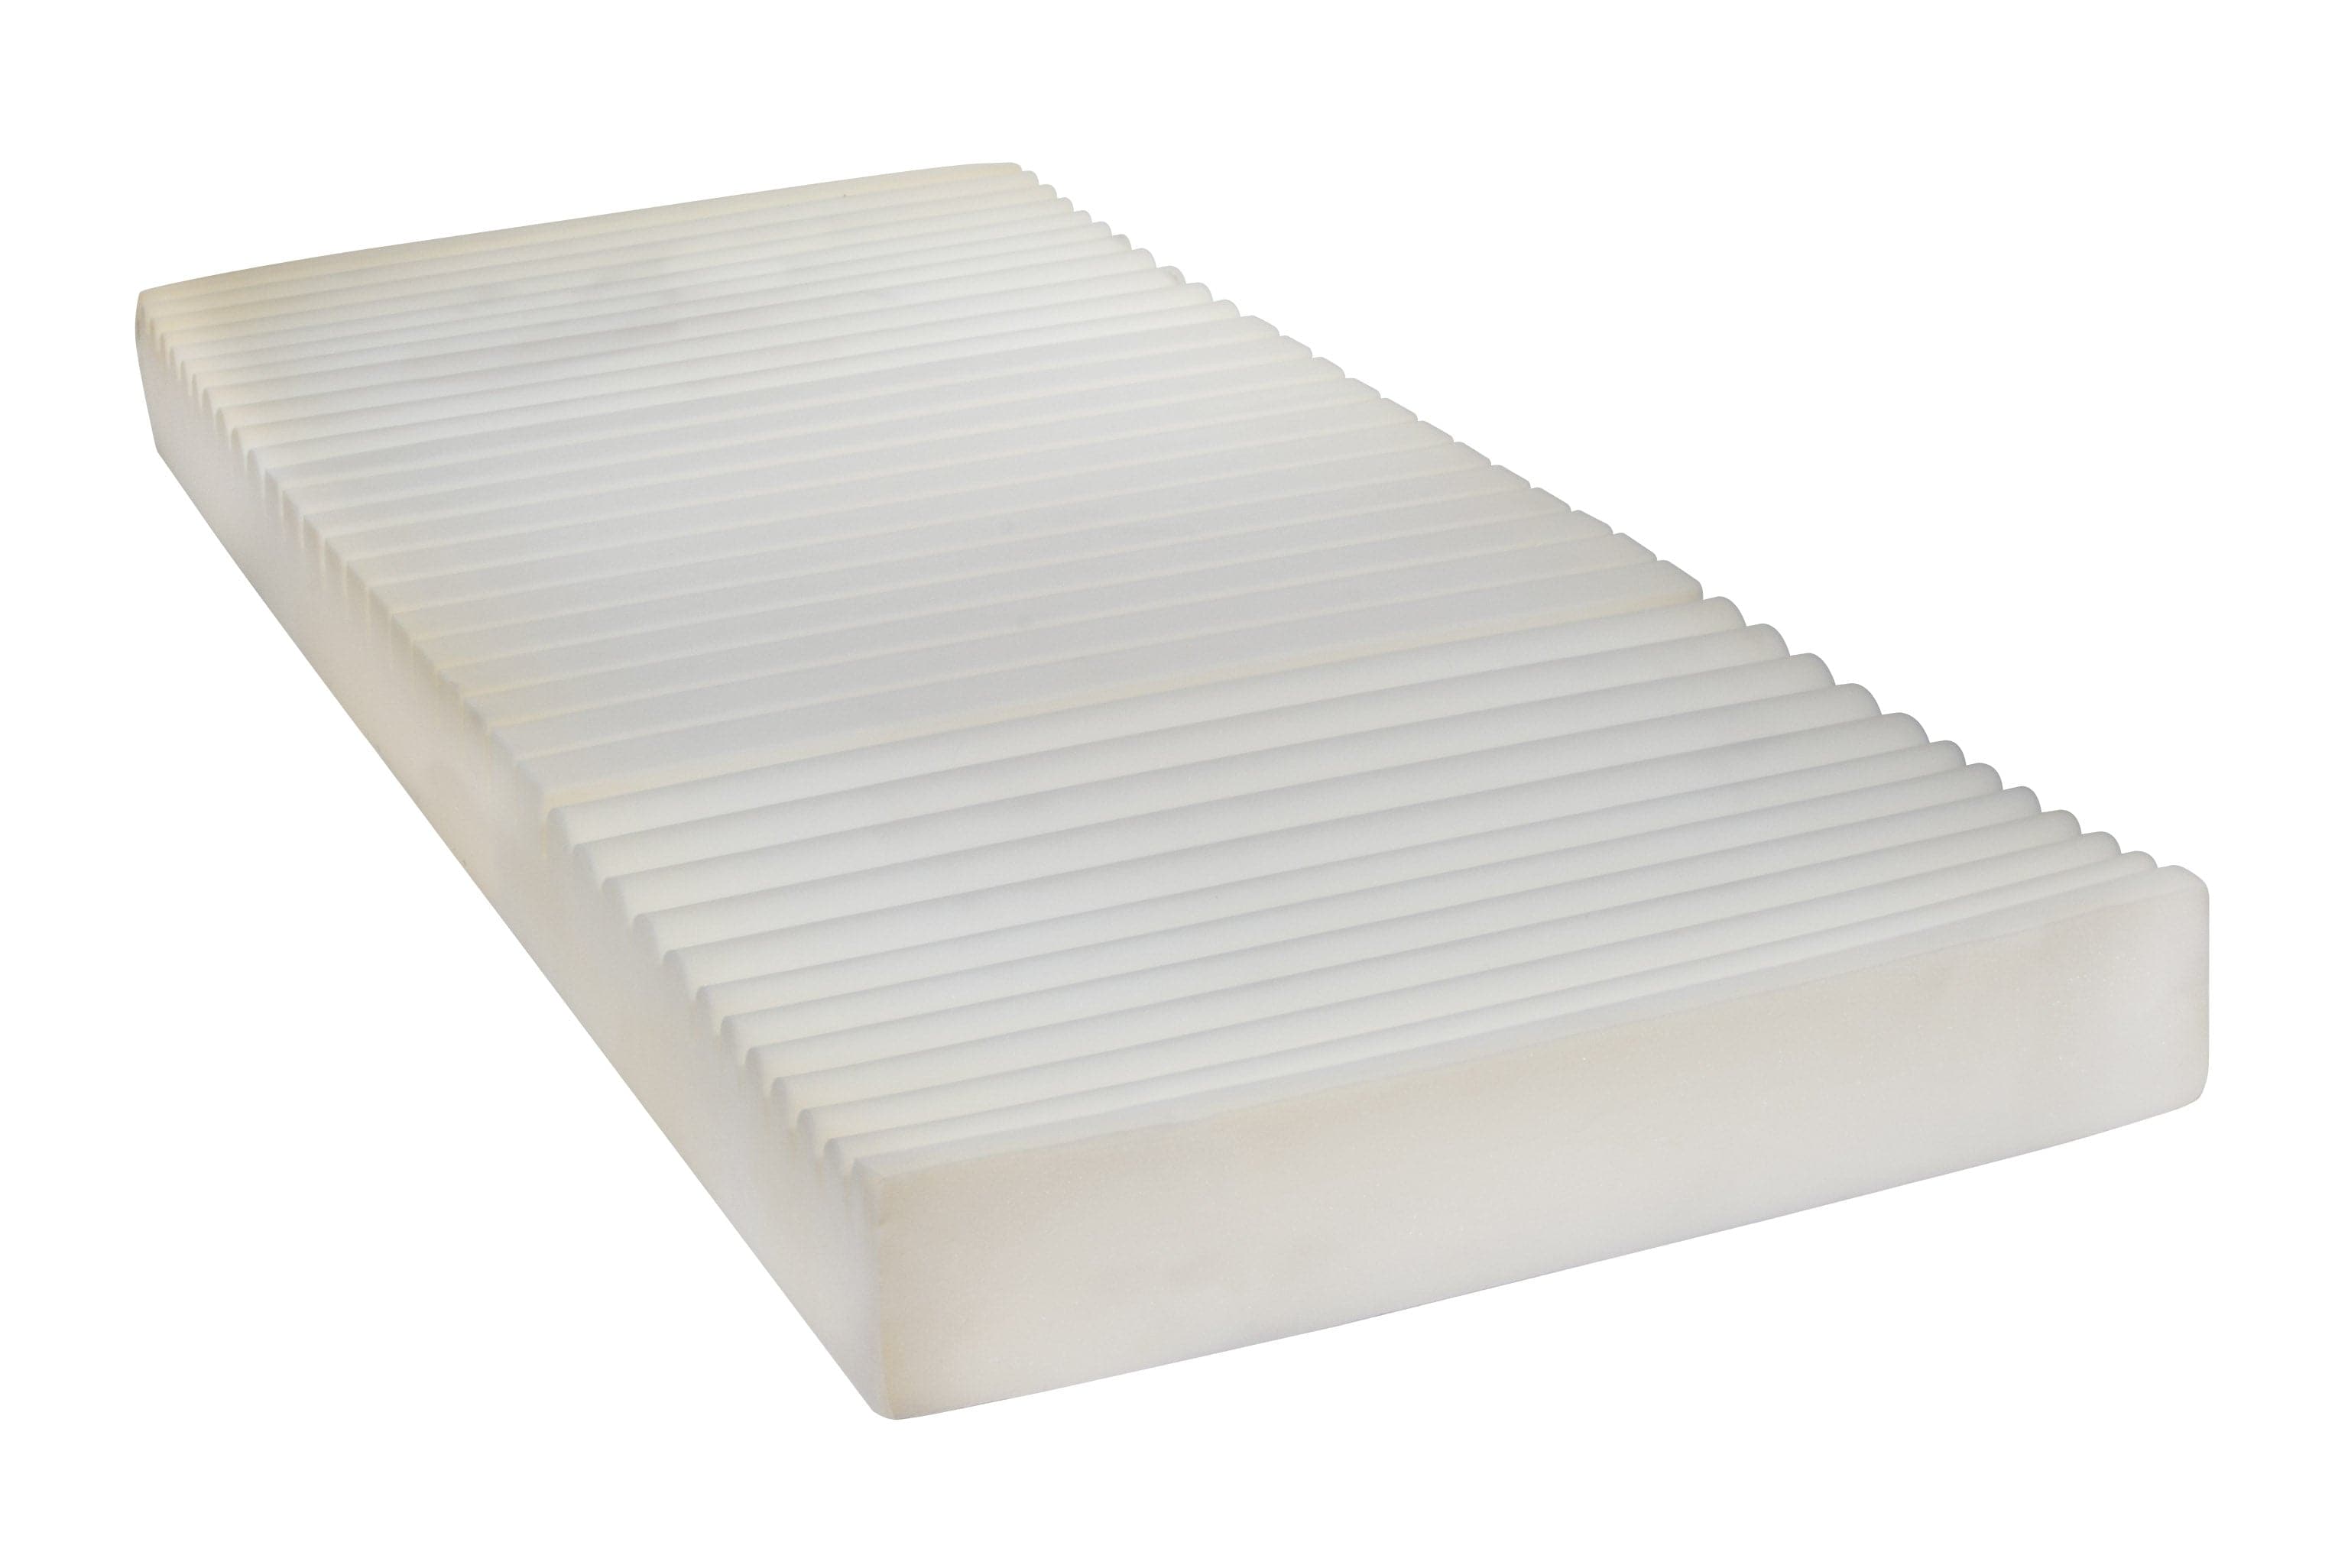 Drive Medical Drive Medical Therapeutic Foam Pressure Reduction Support Mattress 15019